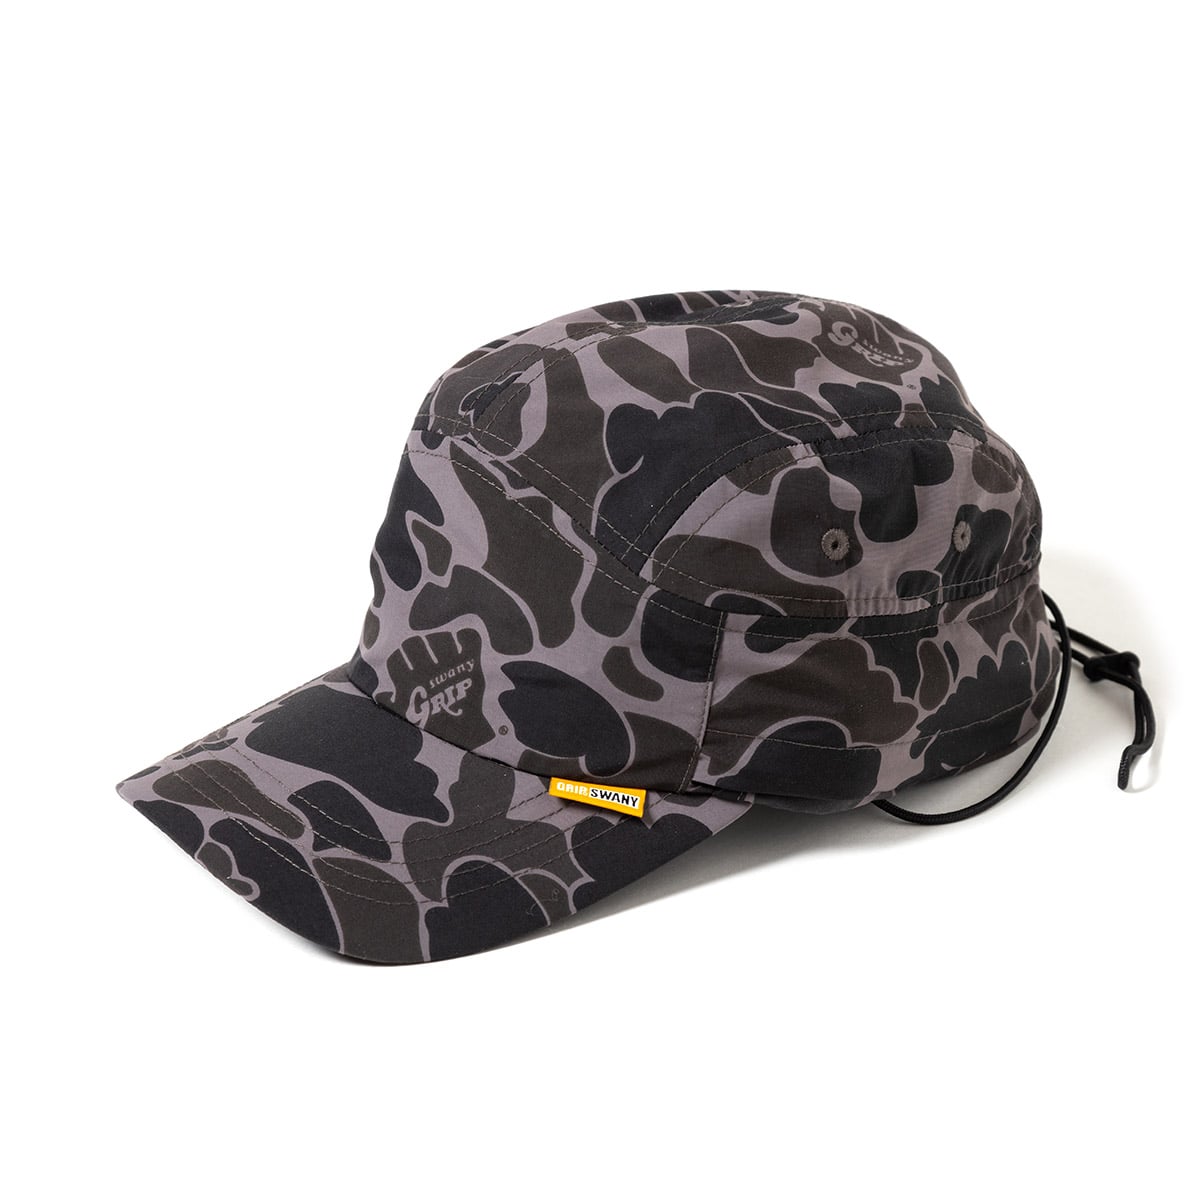  Sprigs Sun Protection Hat Shade Attachment with SPF 45